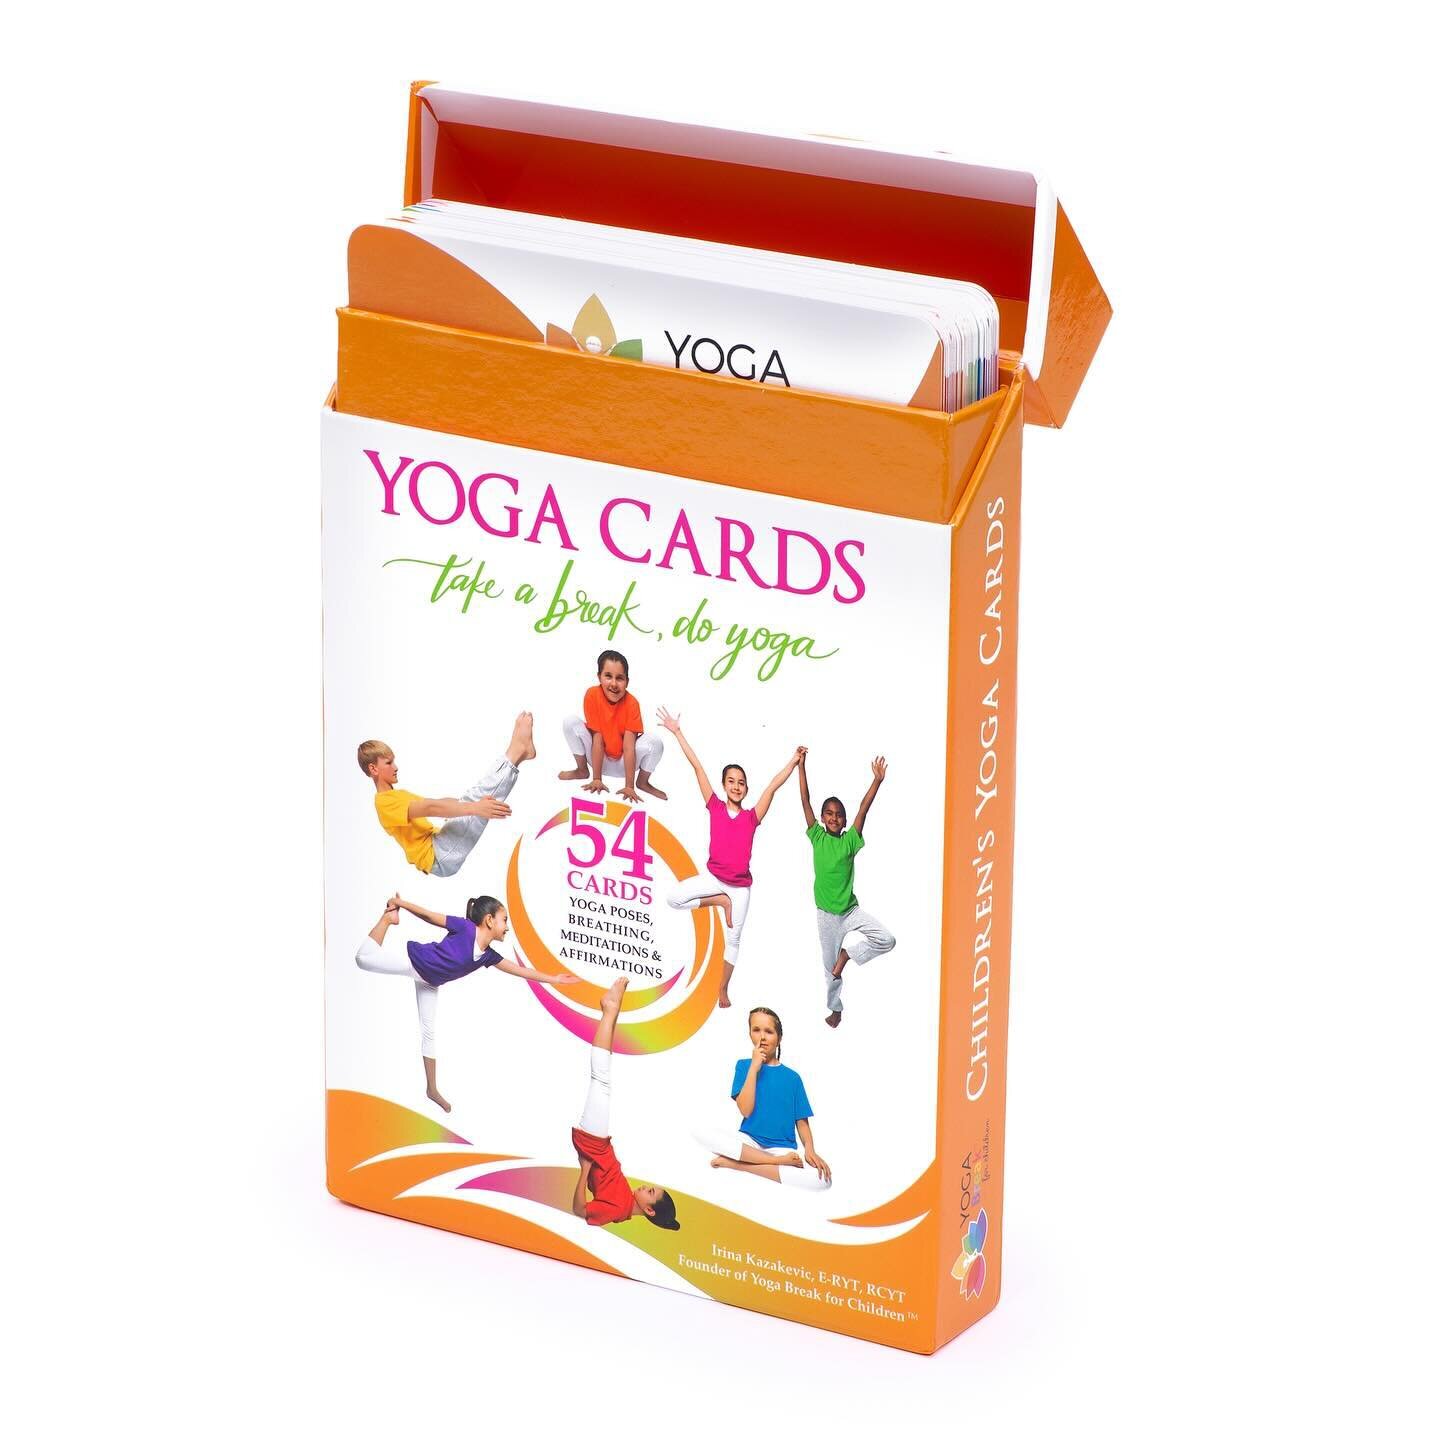 🎉My Children&rsquo;s Yoga Cards are now serving more than 50,000 families and educators around the world!!!🎉😀

Looking for a fun and healthy Christmas gift?! They are perfect for kids, families, teachers and anyone who likes to do yoga with kids!?